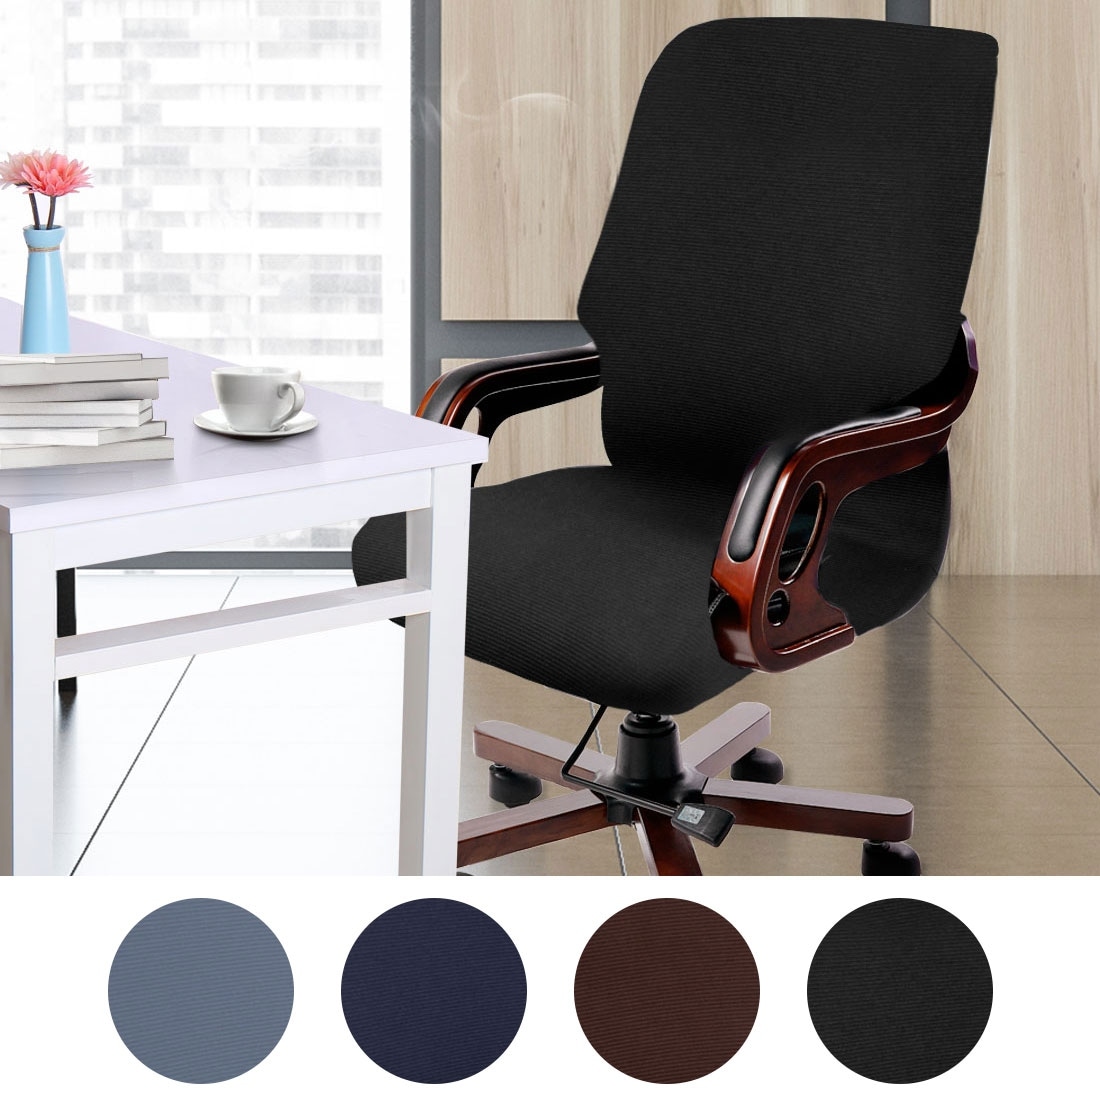 Spandex Chair Cover Water Resistant Jacquard Computer Seat Covers